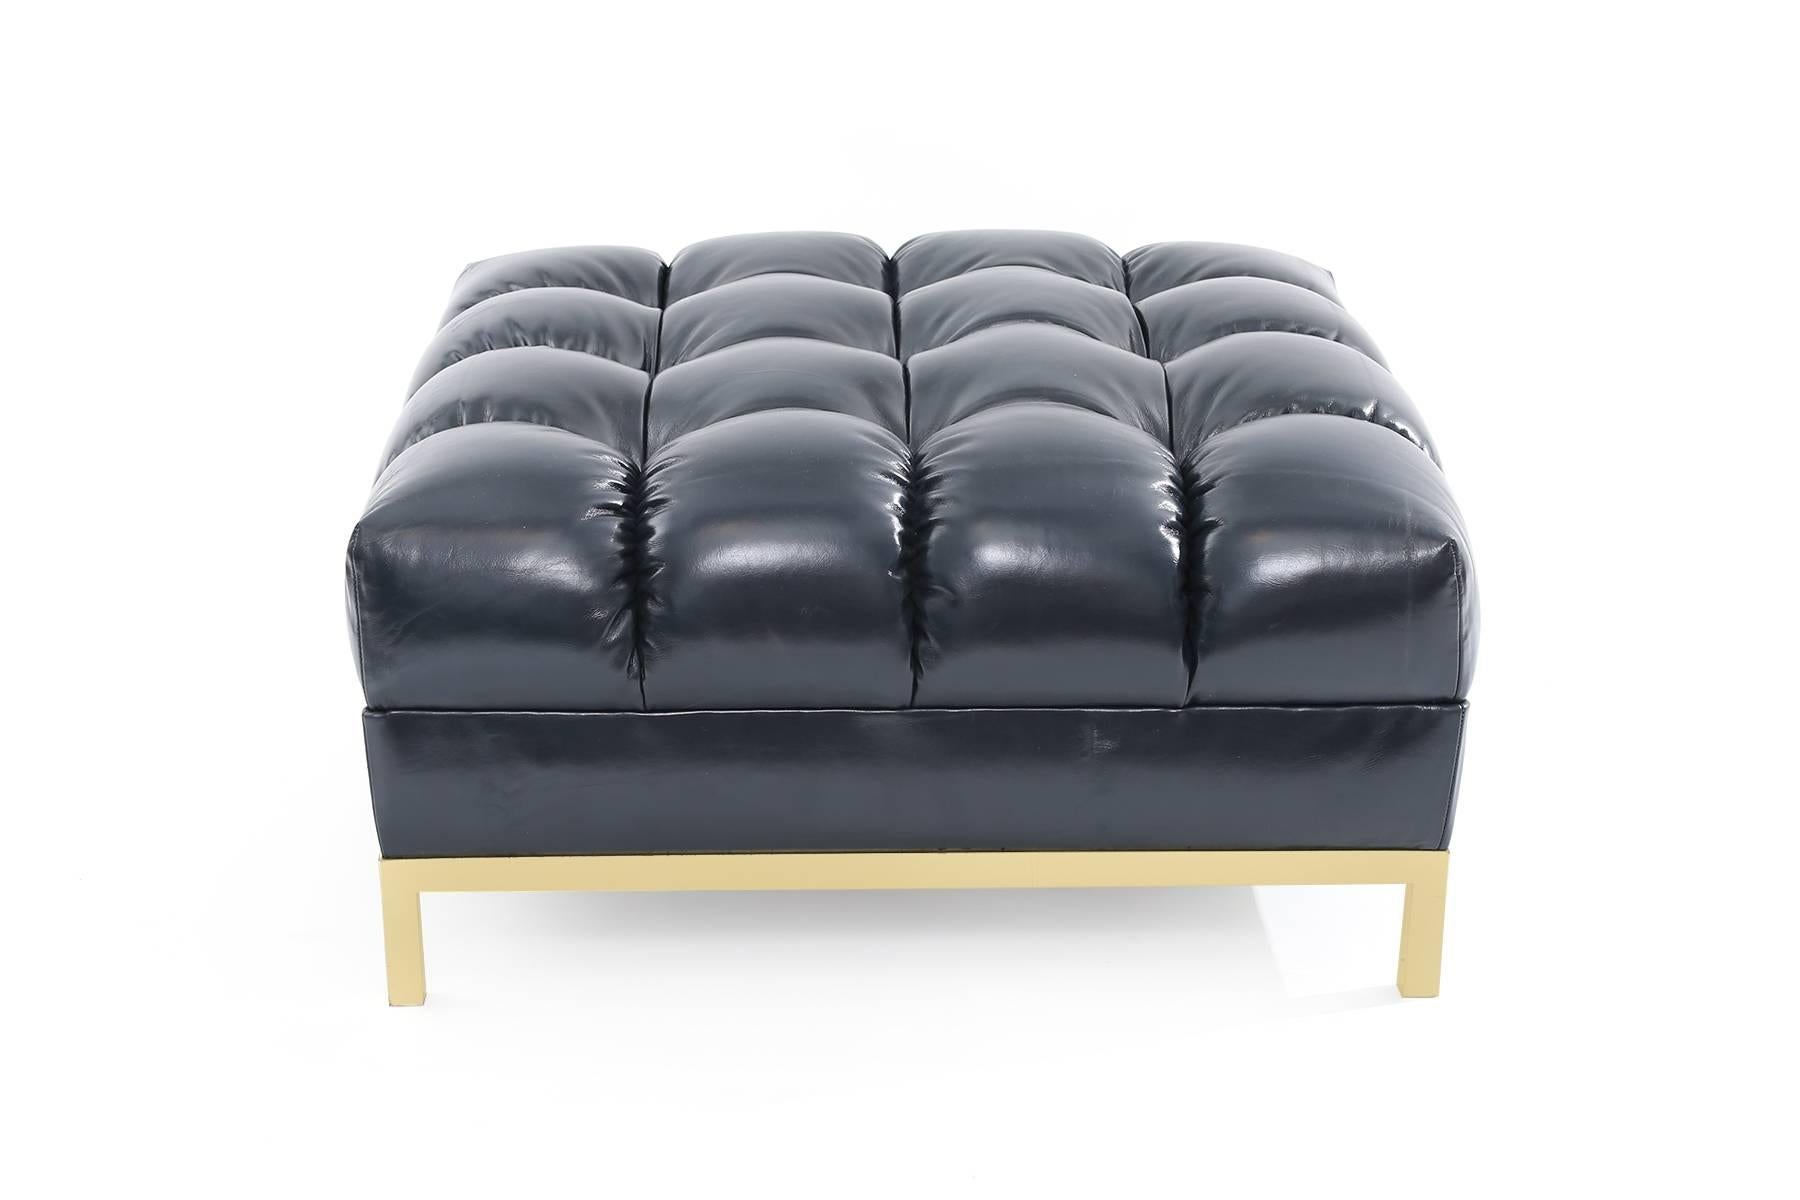 Deep tuft navy leather and brass ottoman or bench circa late 1950s.
This fabulous example has a satin finished brass base and has been newly upholstered in a supple and chic navy leather.